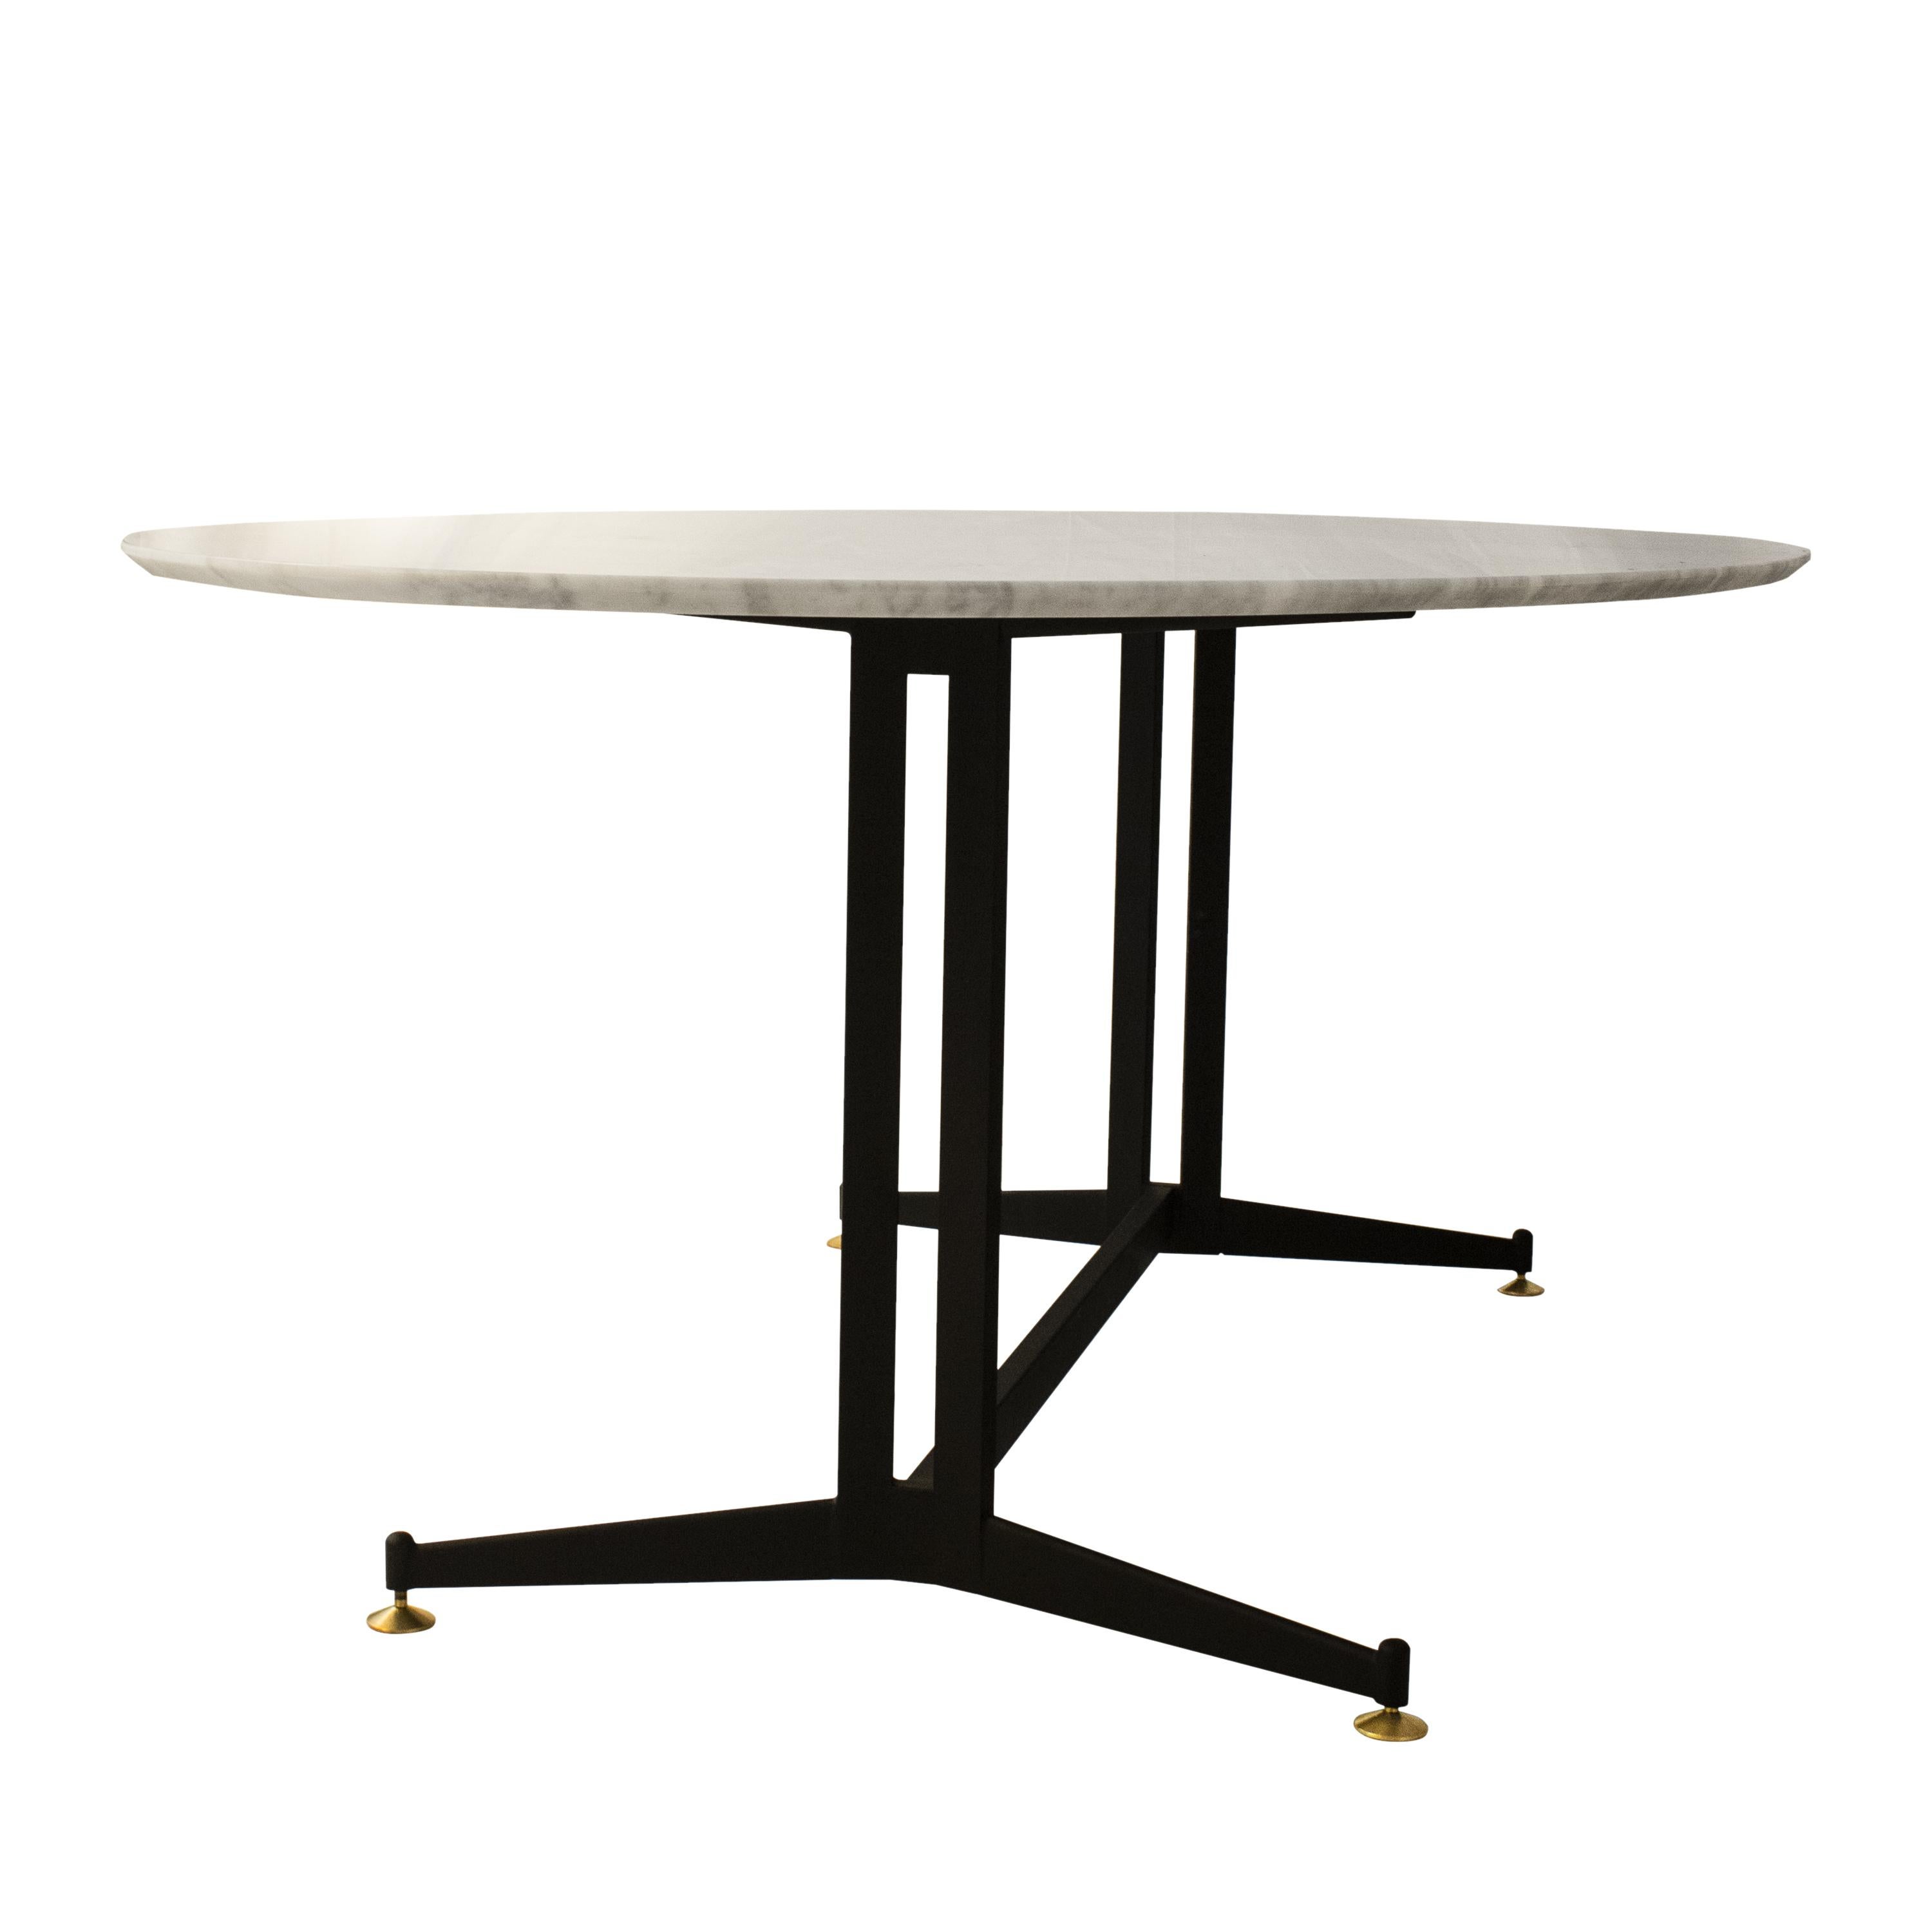 Mid-20th Century Mid-Century Modern Carrara Marble Dining Table with Metallic Foot, Italy, 1950 For Sale